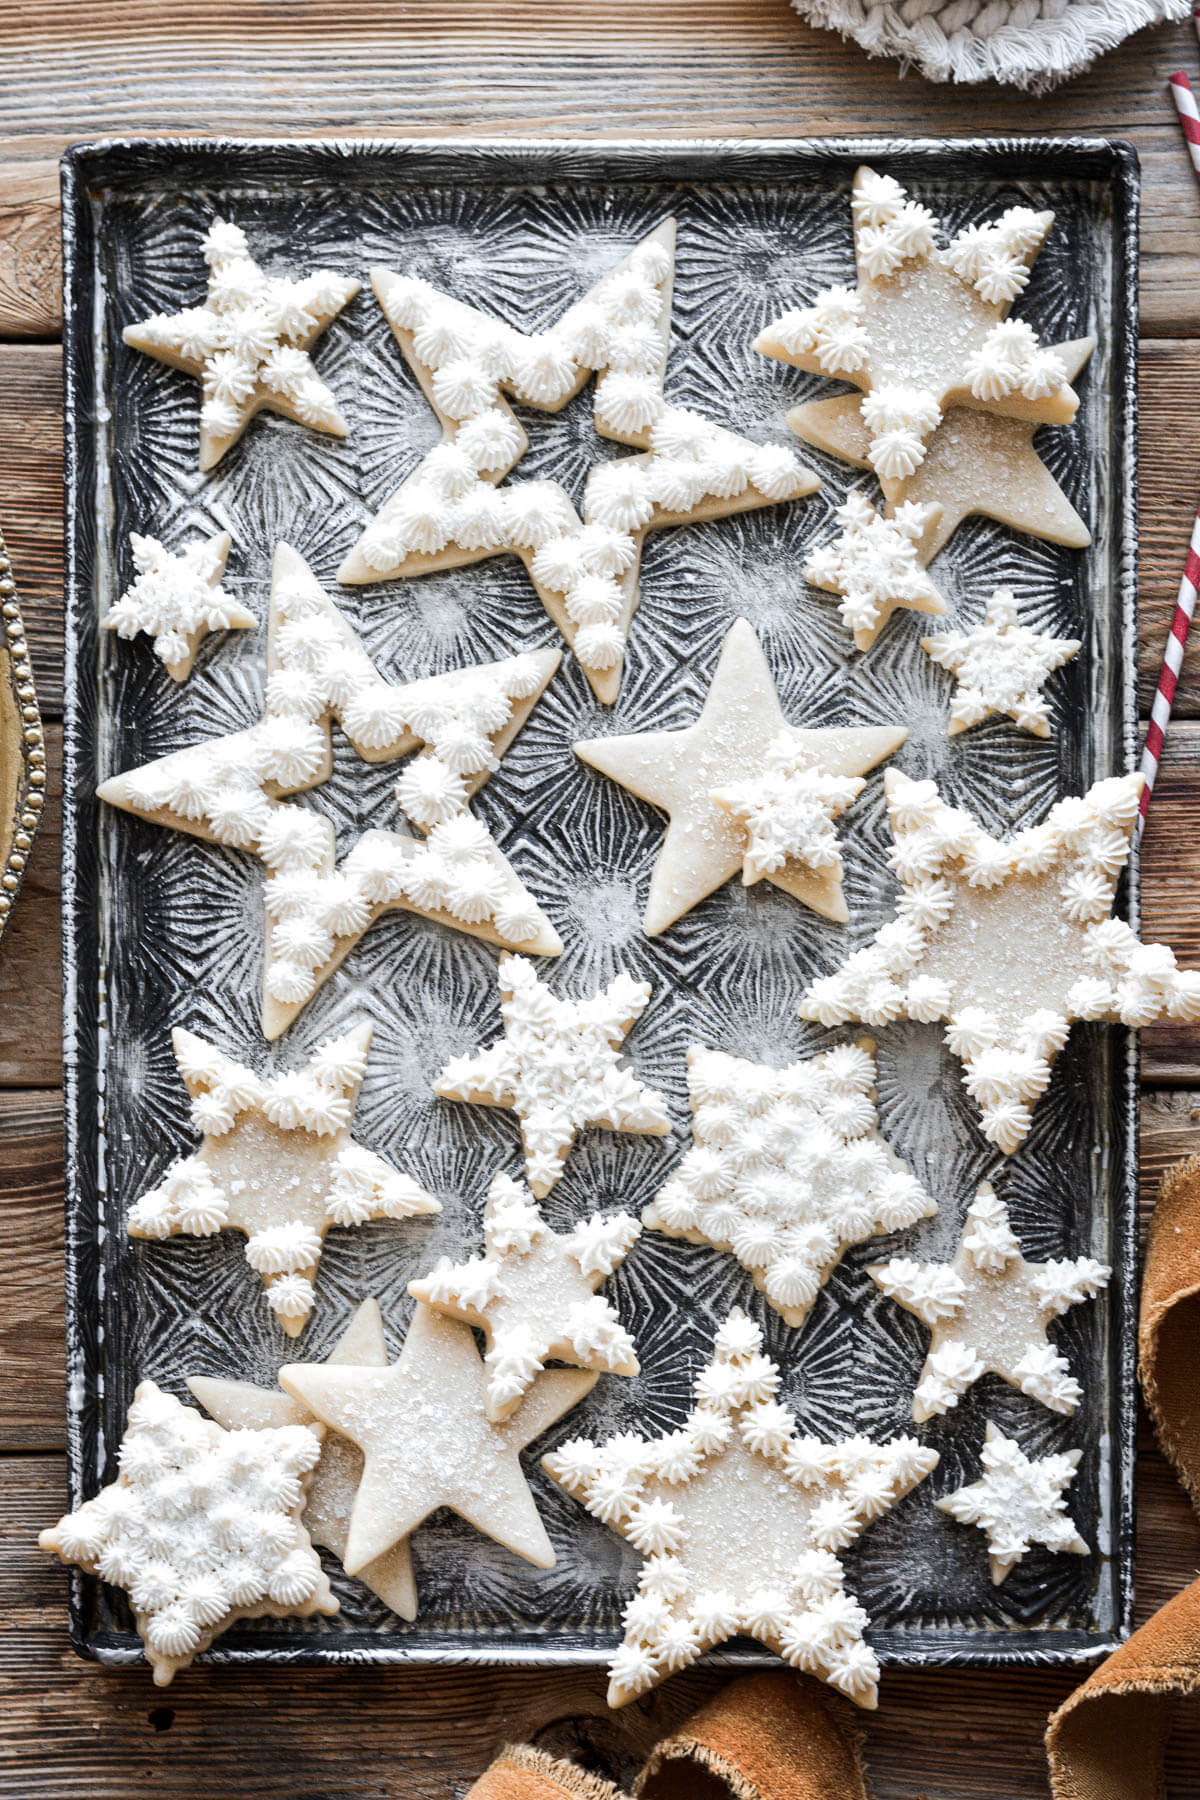 Star shaped Christmas cutout cookies with peppermint buttercream on a baking sheet.